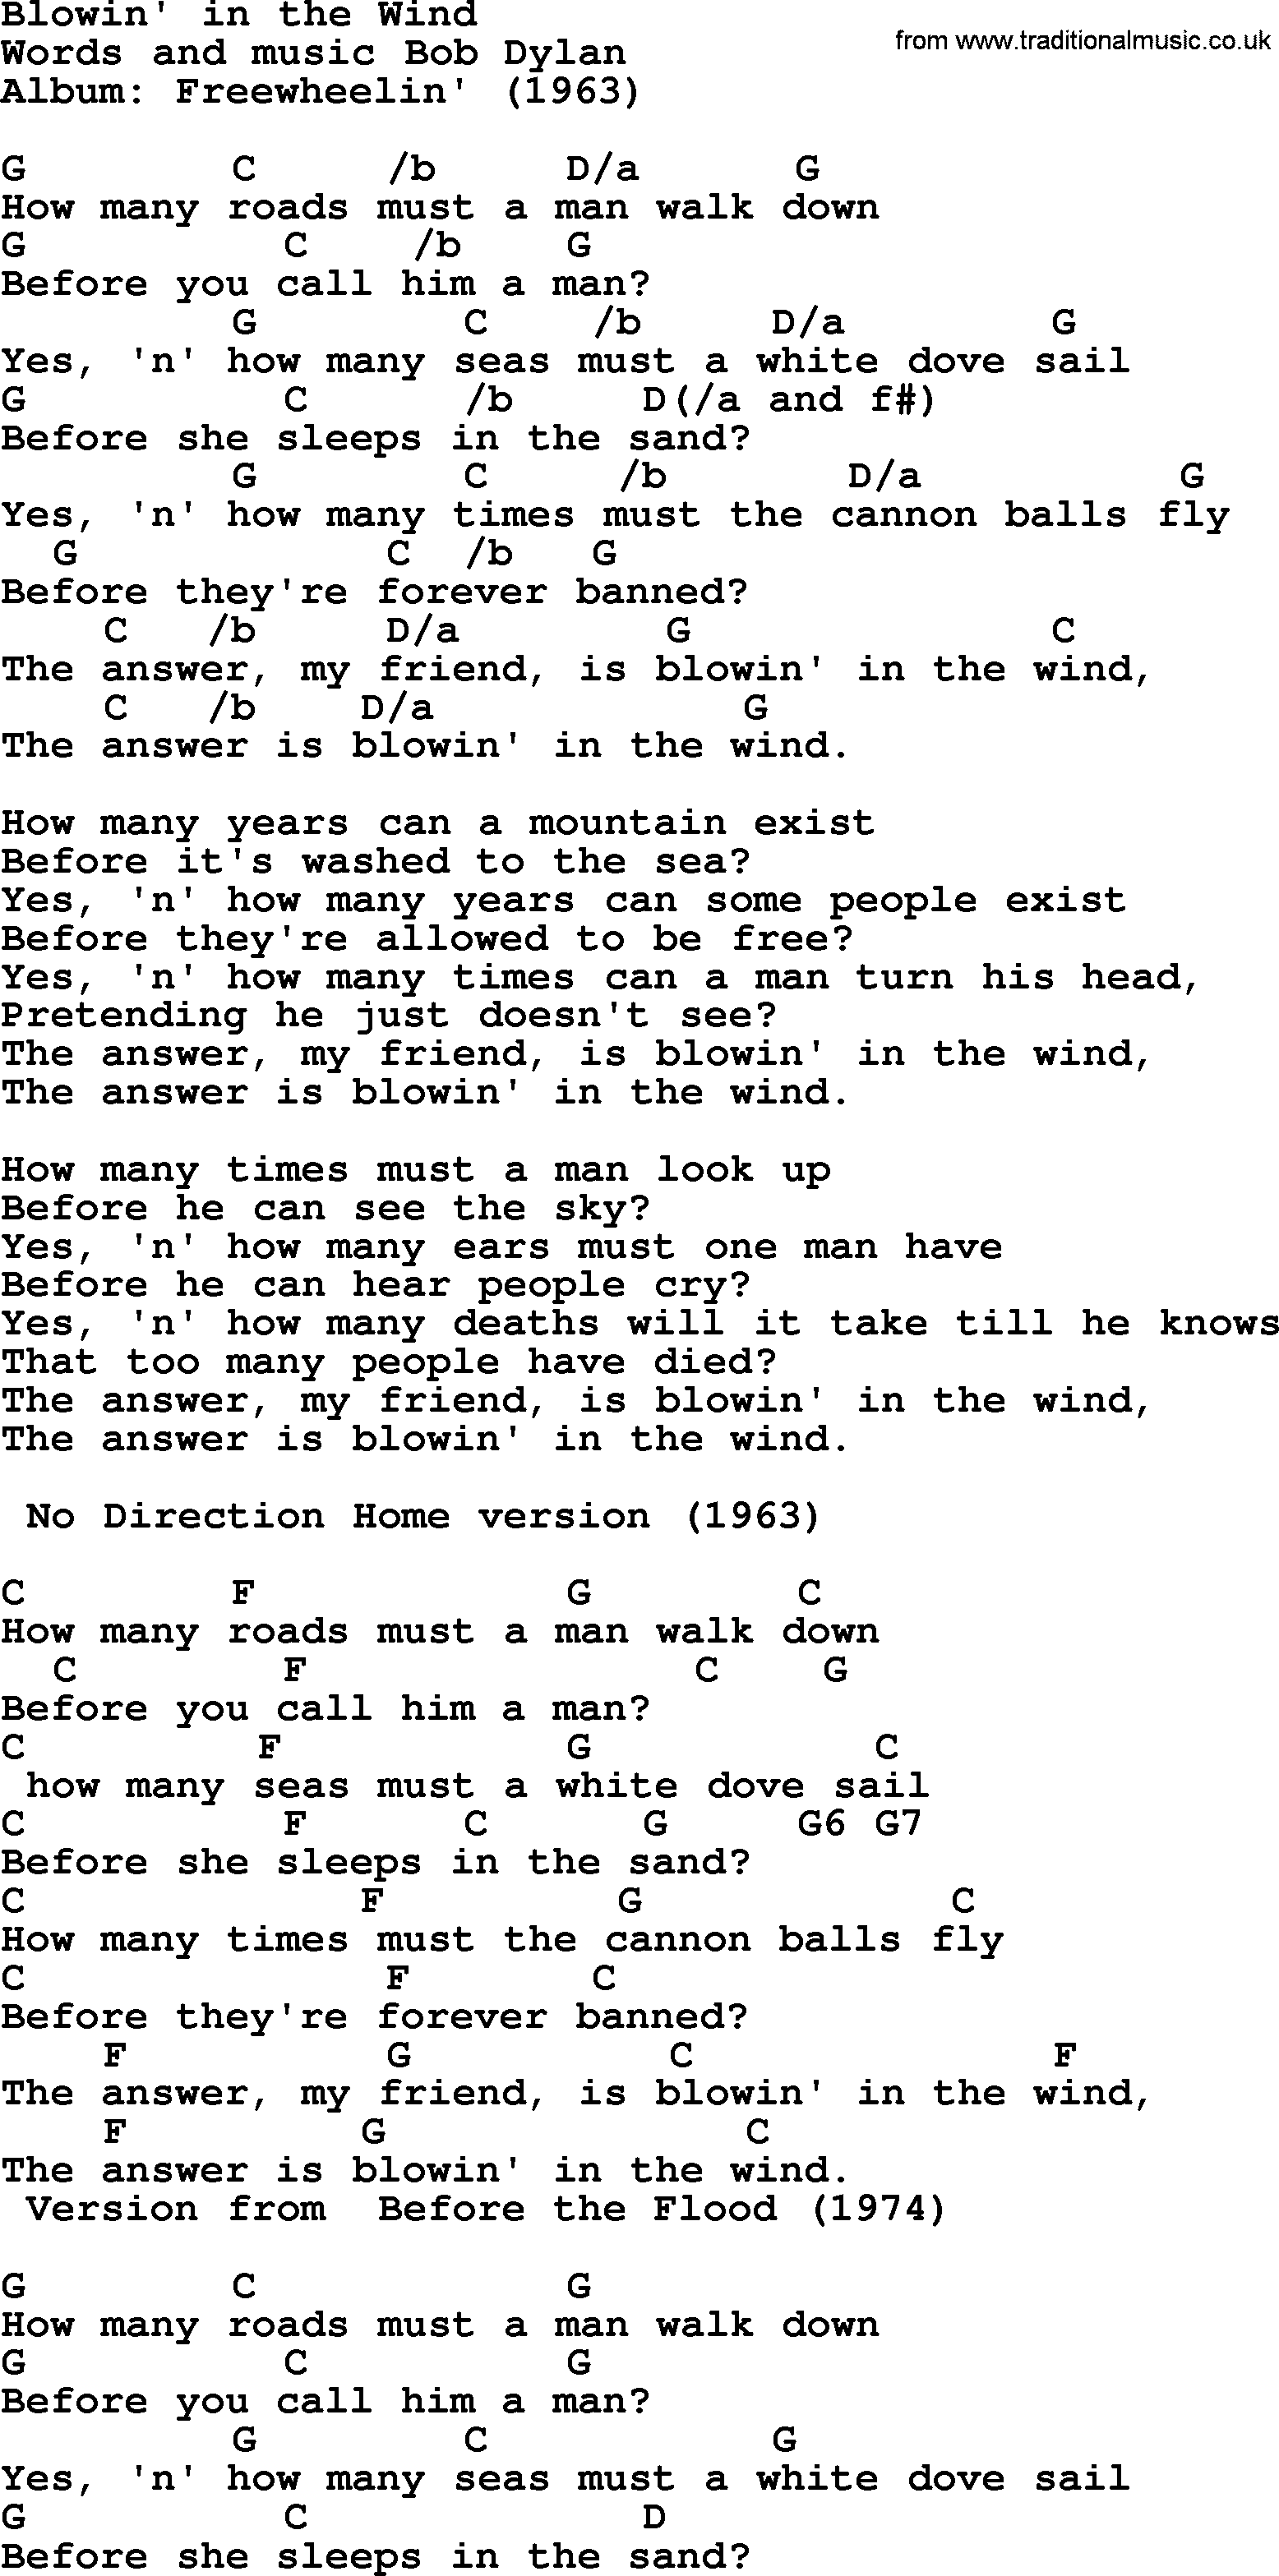 Bob Dylan song, lyrics with chords - Blowin' in the Wind